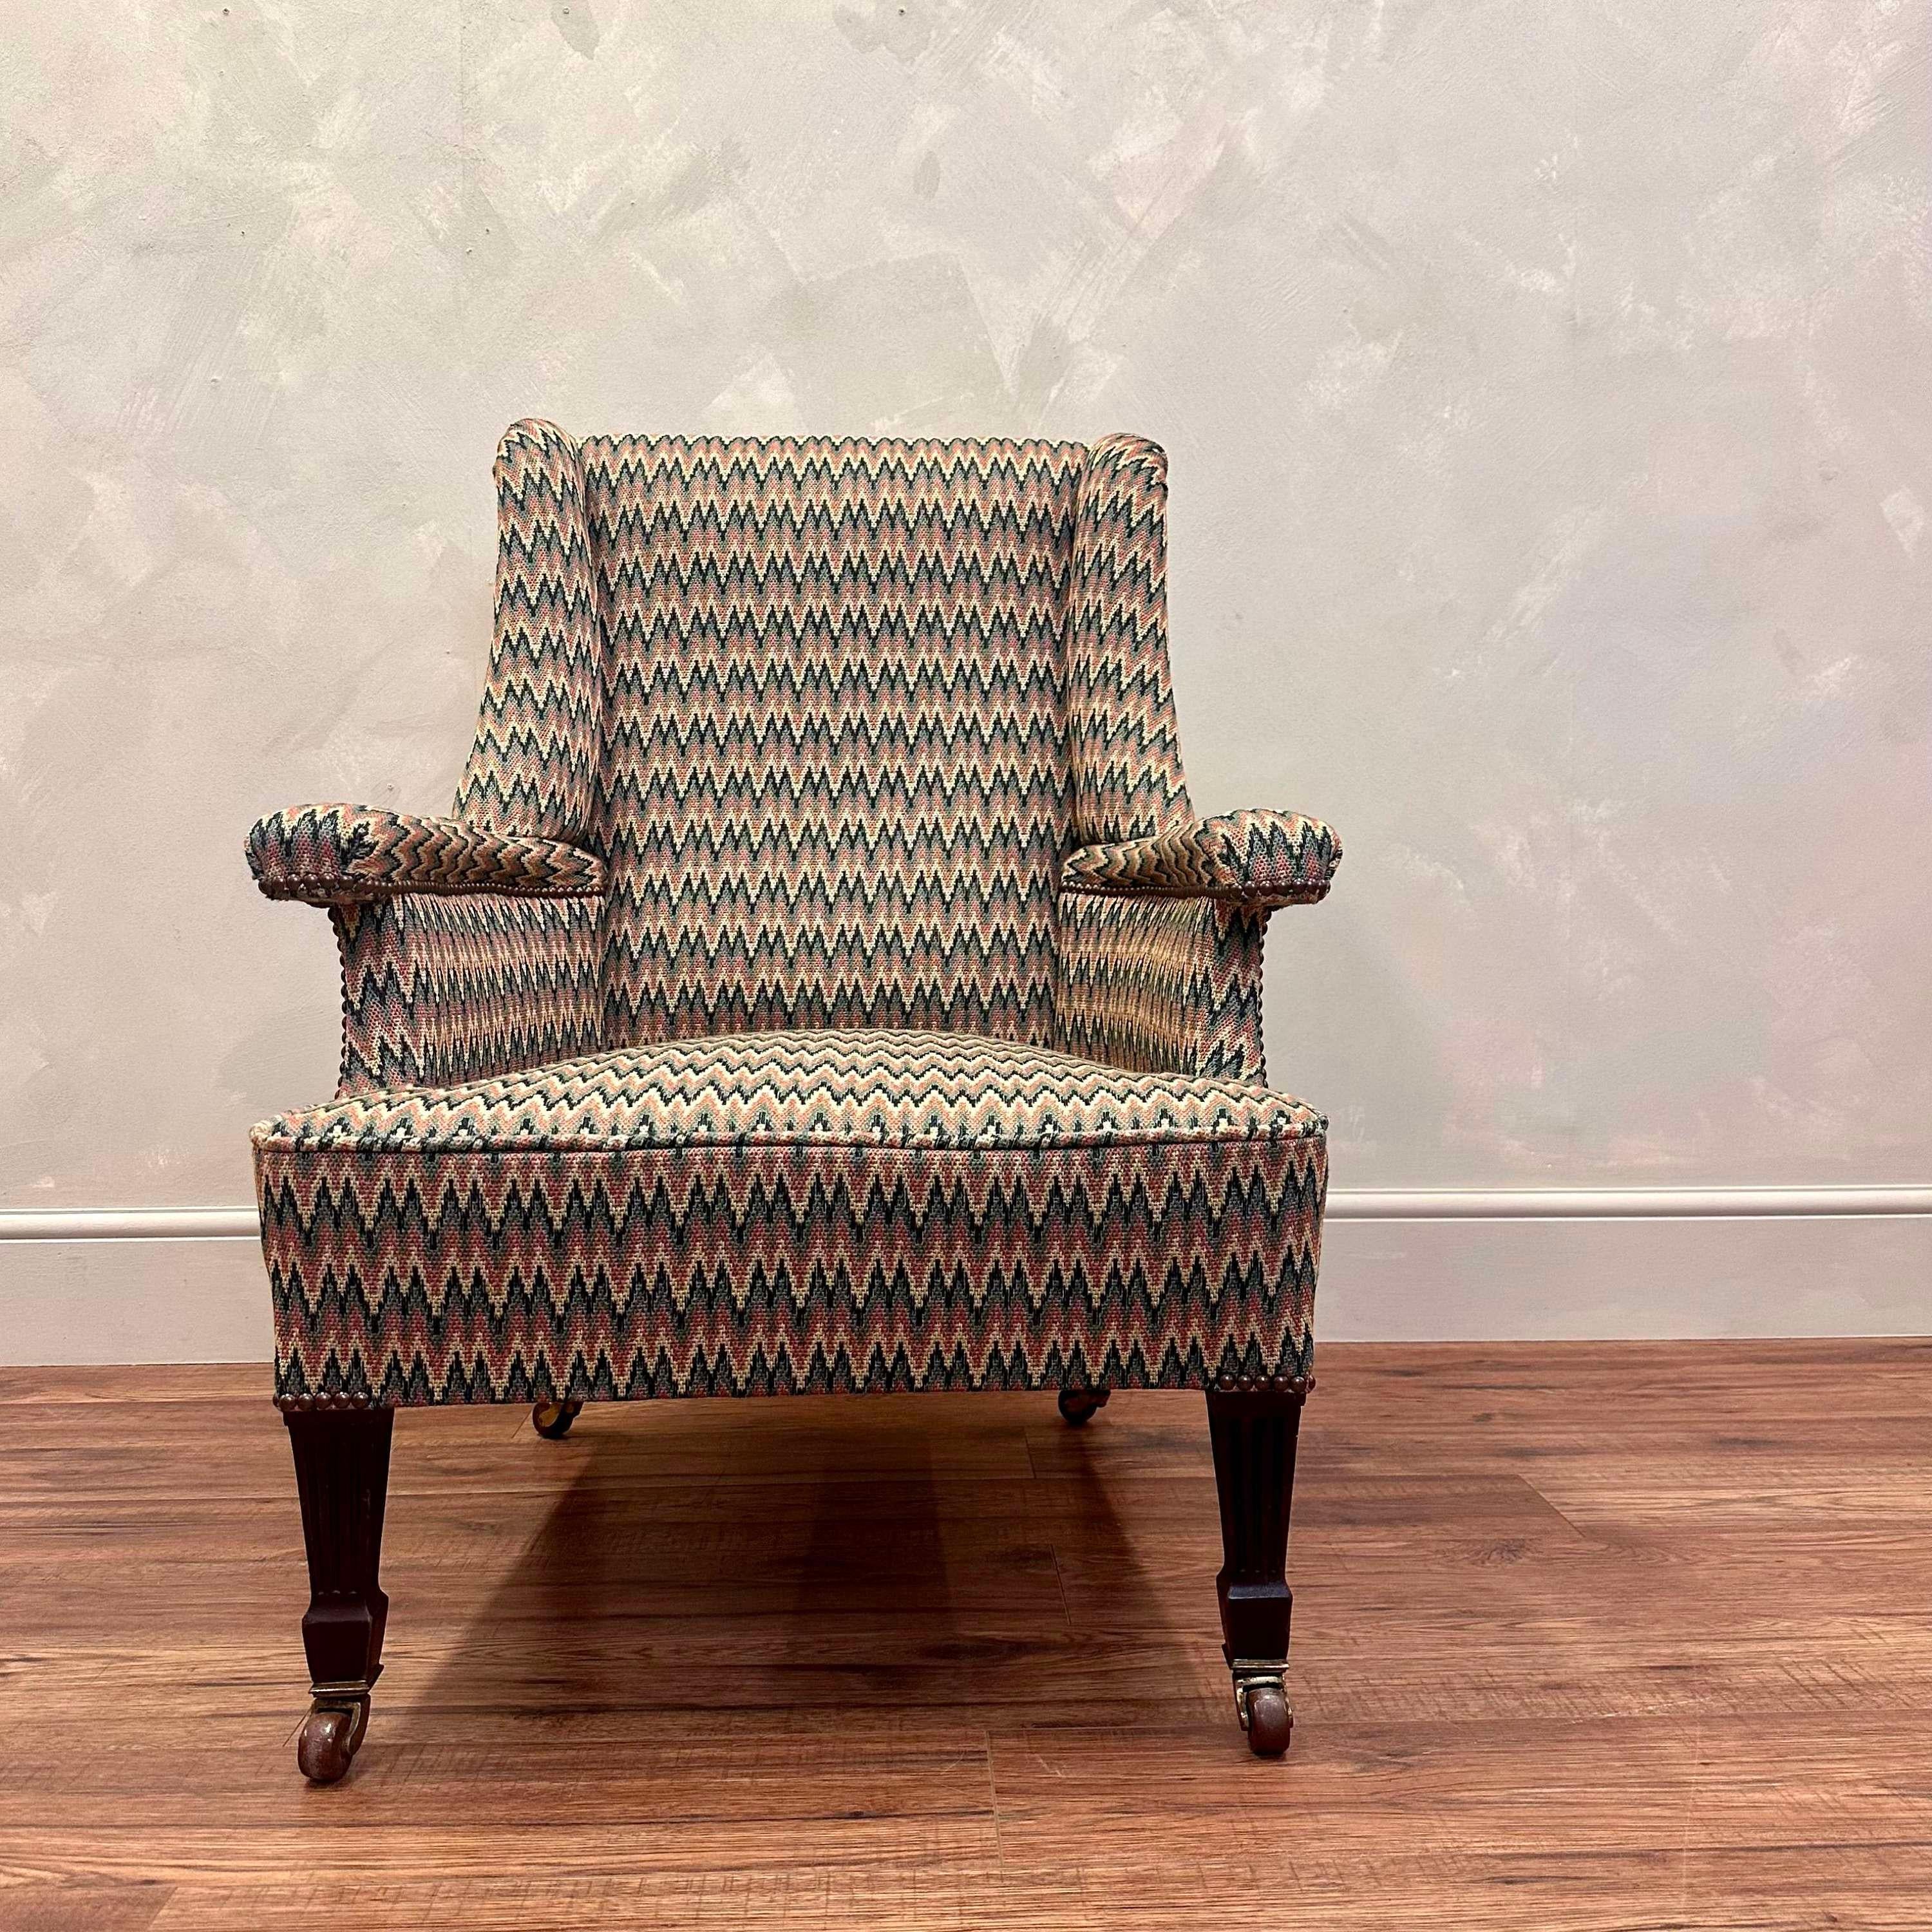 British 19th Century English Upholstered Armchair Flamstitch Fabric  For Sale